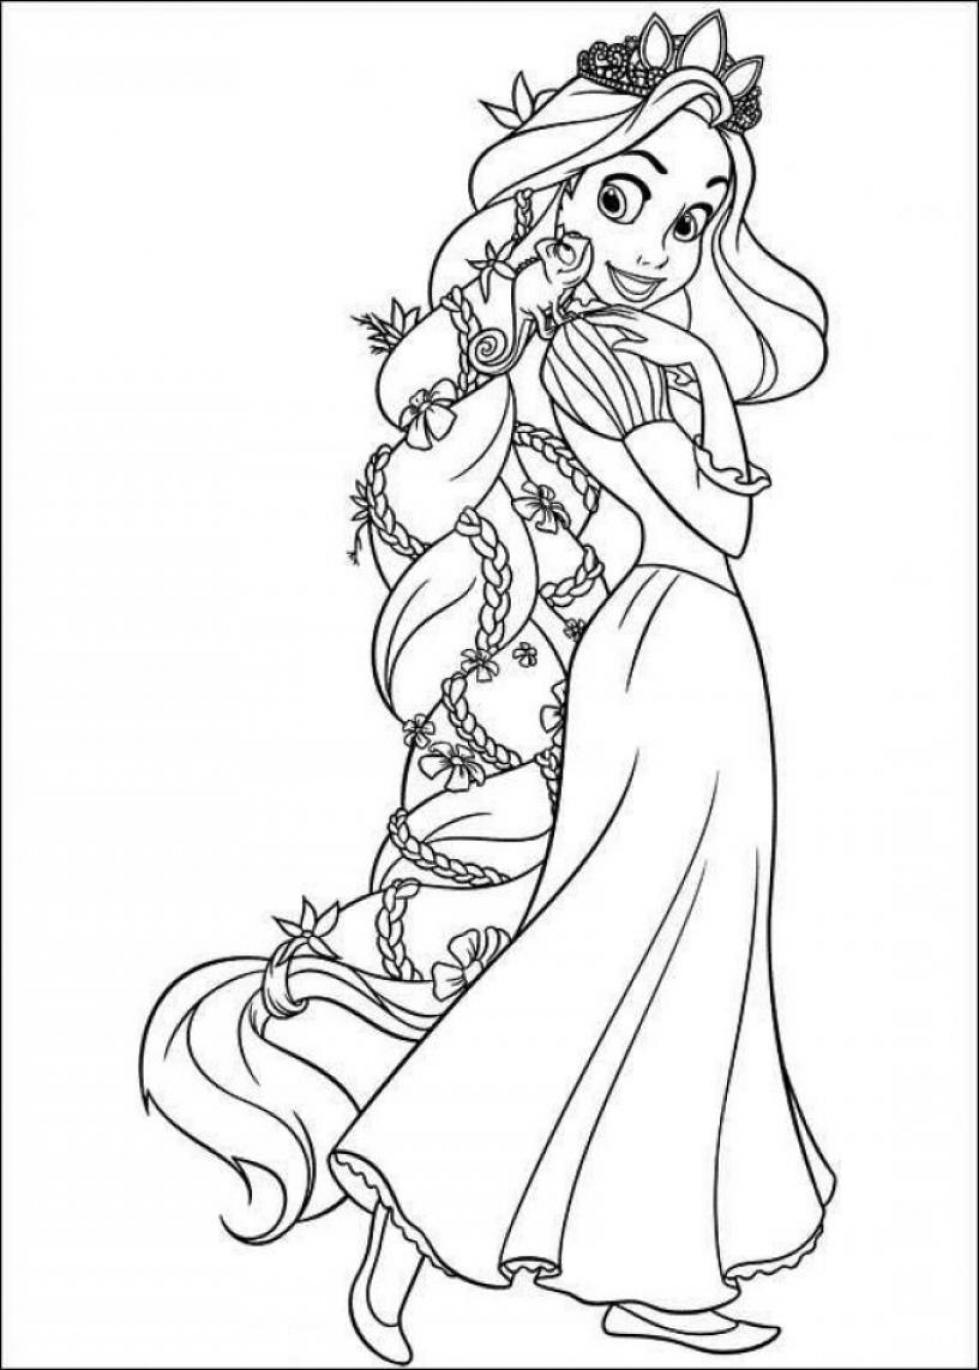 The Best Disney Tangled Rapunzel Coloring Pages | Tangled coloring ...